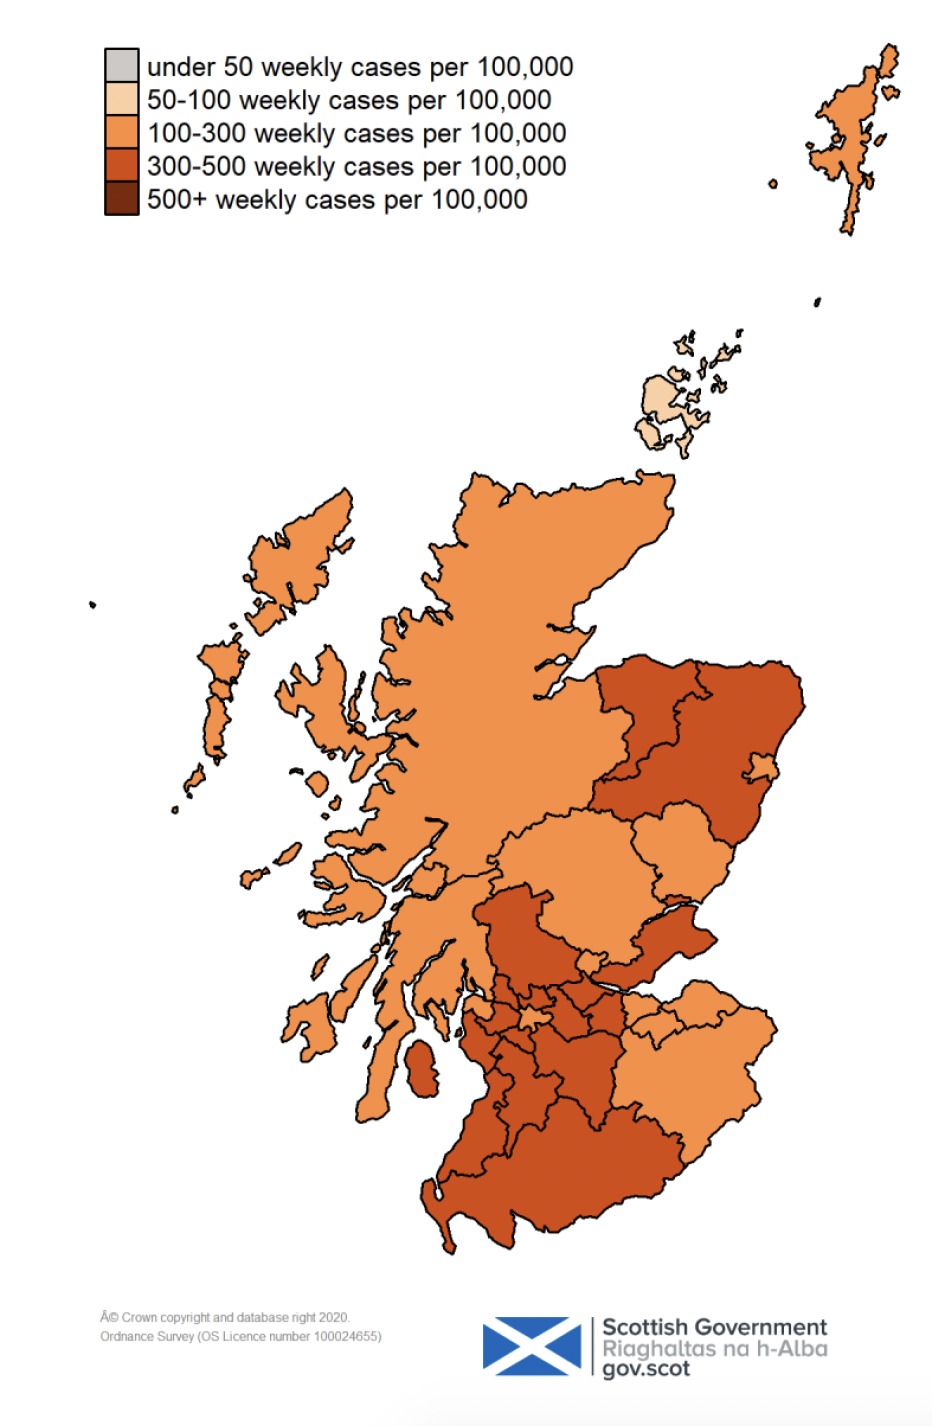 This colour coded map of Scotland shows the different rates of weekly positive cases per 100,000 people across Scotland’s Local Authorities. The colours range from grey for under 50 weekly cases per 100,000, through very light orange for 50 to 100, orange for 100-300, darker orange for 300-500, and very dark orange for over 500 weekly cases per 100,000 people. 
No local authorities are showing as very dark orange on the map this week, with over 500 weekly cases, and no local authorities are showing as grey for under 50 weekly cases per 100,000. Orkney is shown as very light orange, with 50-100 weekly cases per 100,000 people. Aberdeen, Angus, Argyll and Bute, Edinburgh, Clackmannanshire, East Lothian, Glasgow, Highland, Inverclyde, Midlothian, Na h-Eileanan Siar, Perth and Kinross, Scottish Borders and Shetland are showing as orange with 100-300 weekly cases. All other local authorities are shown as darker orange with 300-500 weekly cases per 100,000.
